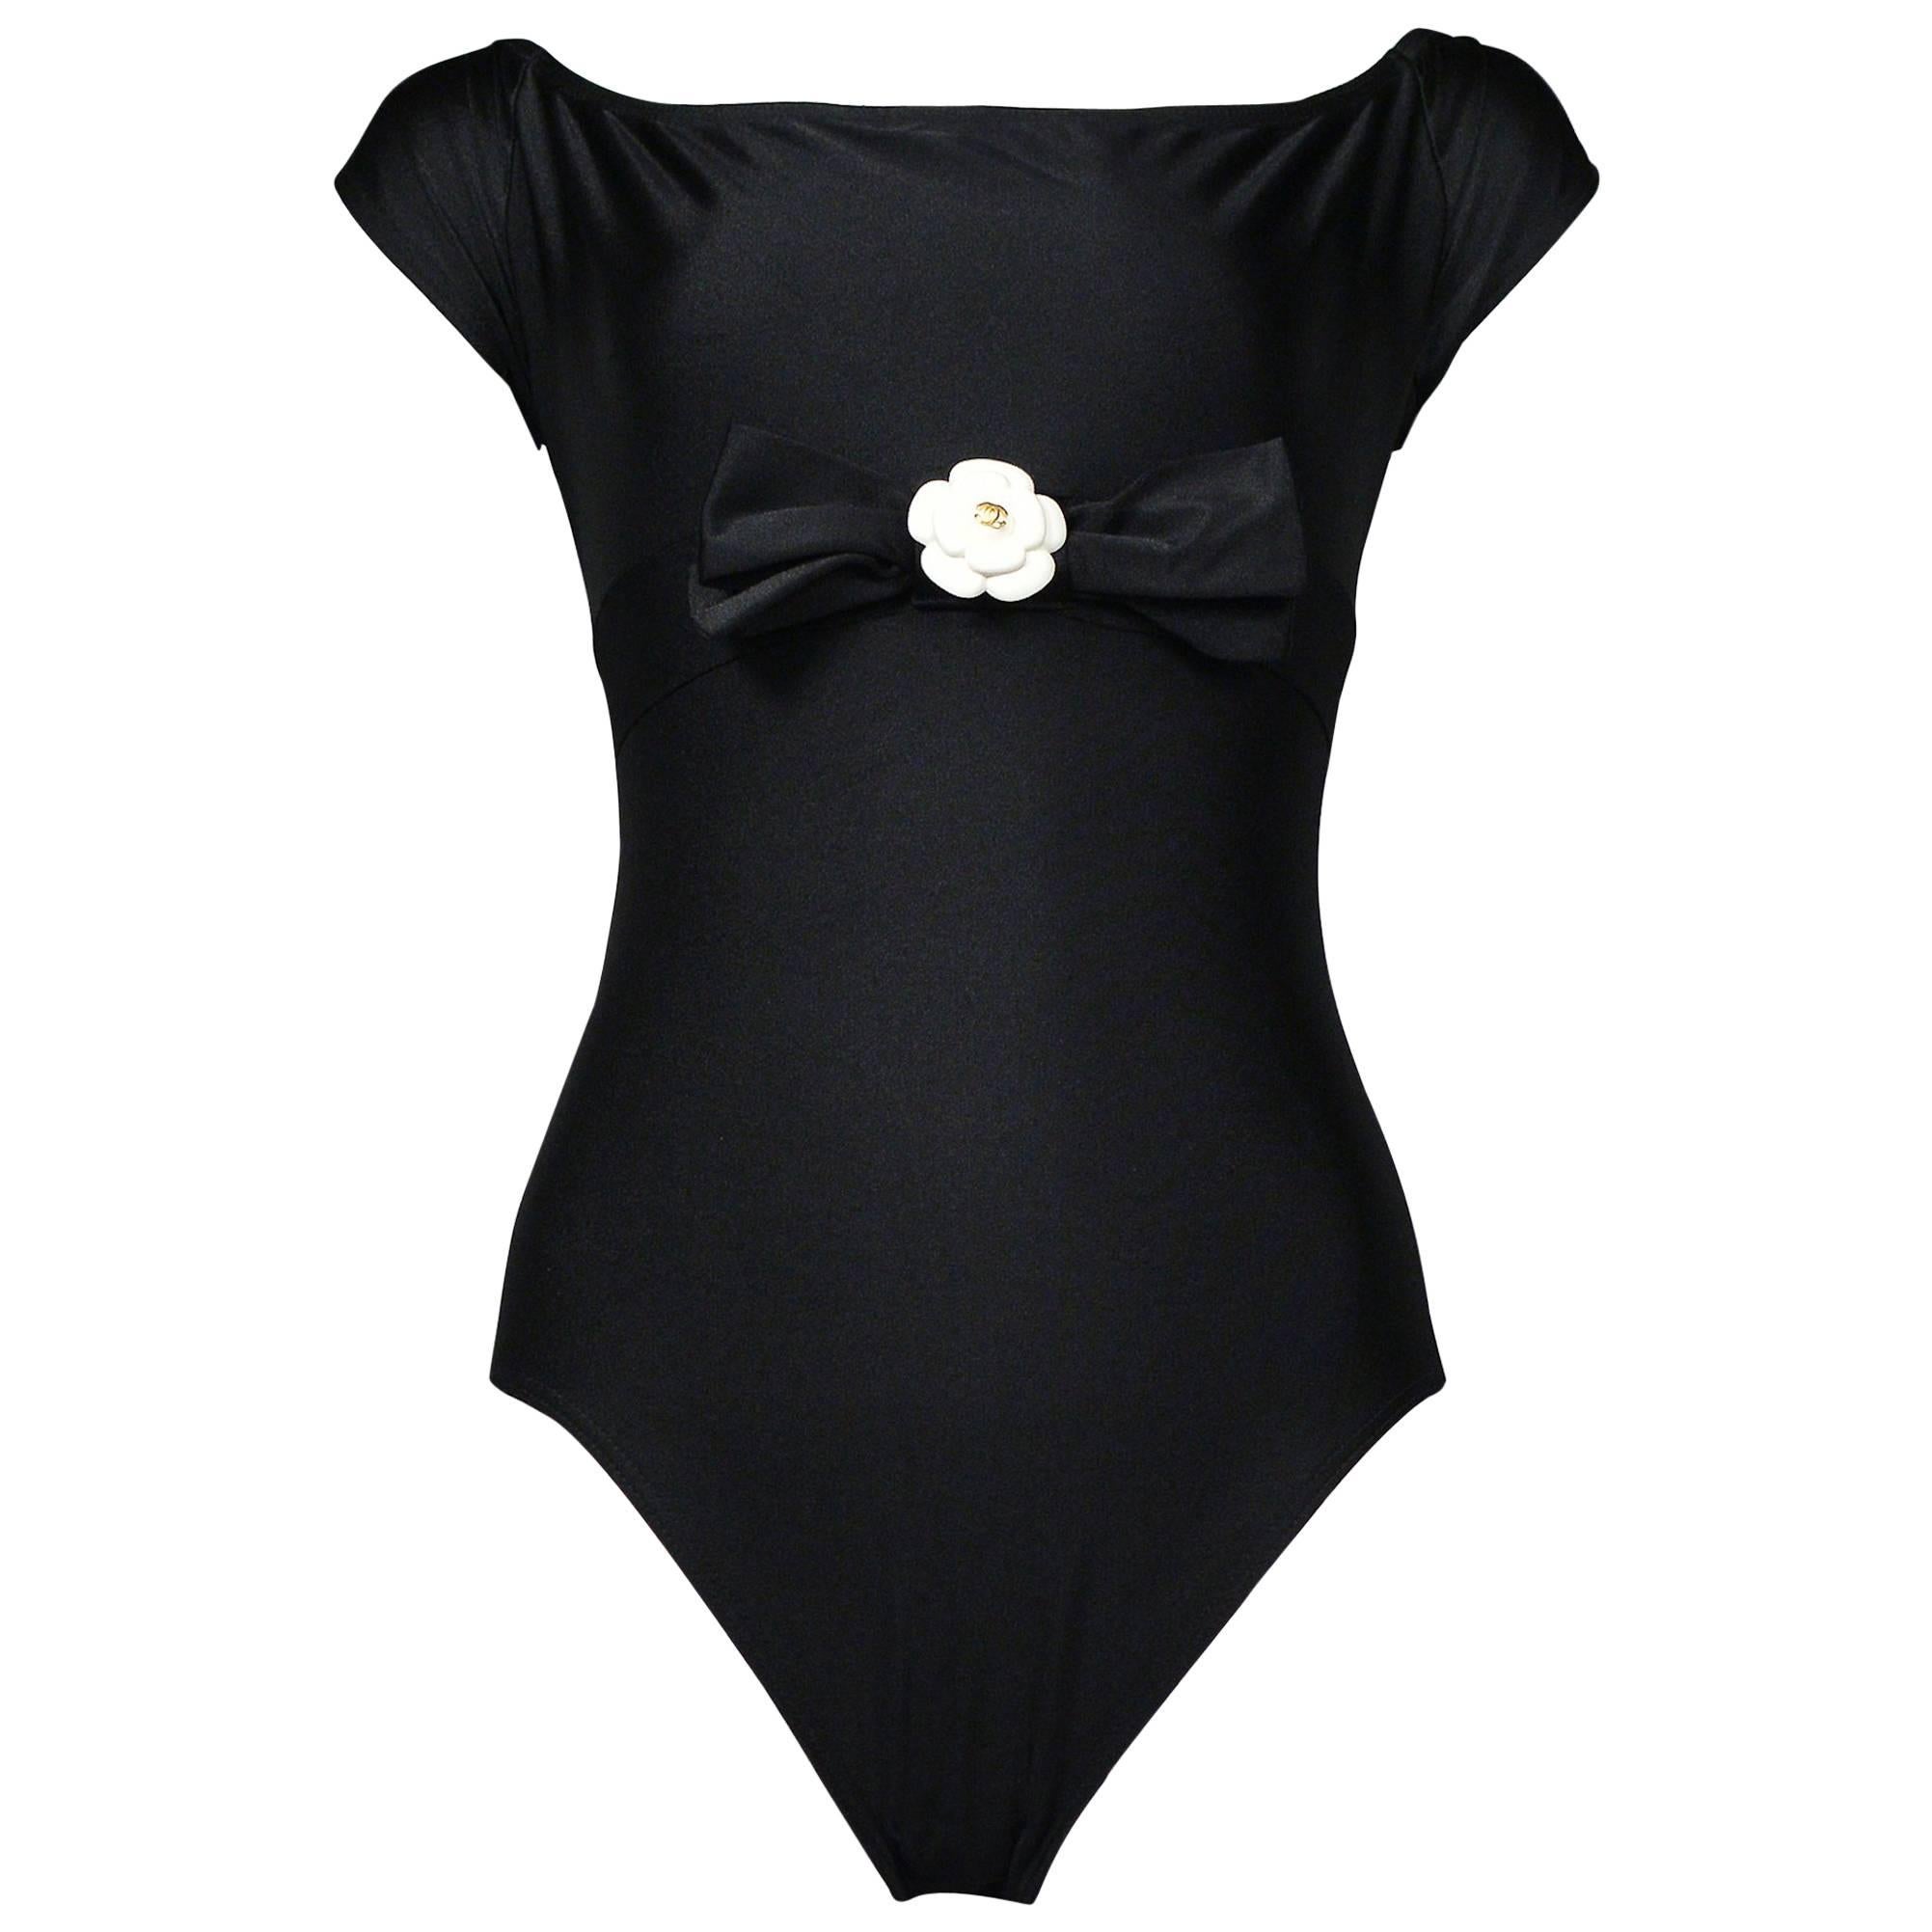 Chanel Camellia Charm and Bow Swim or Body Suit - New Vintage